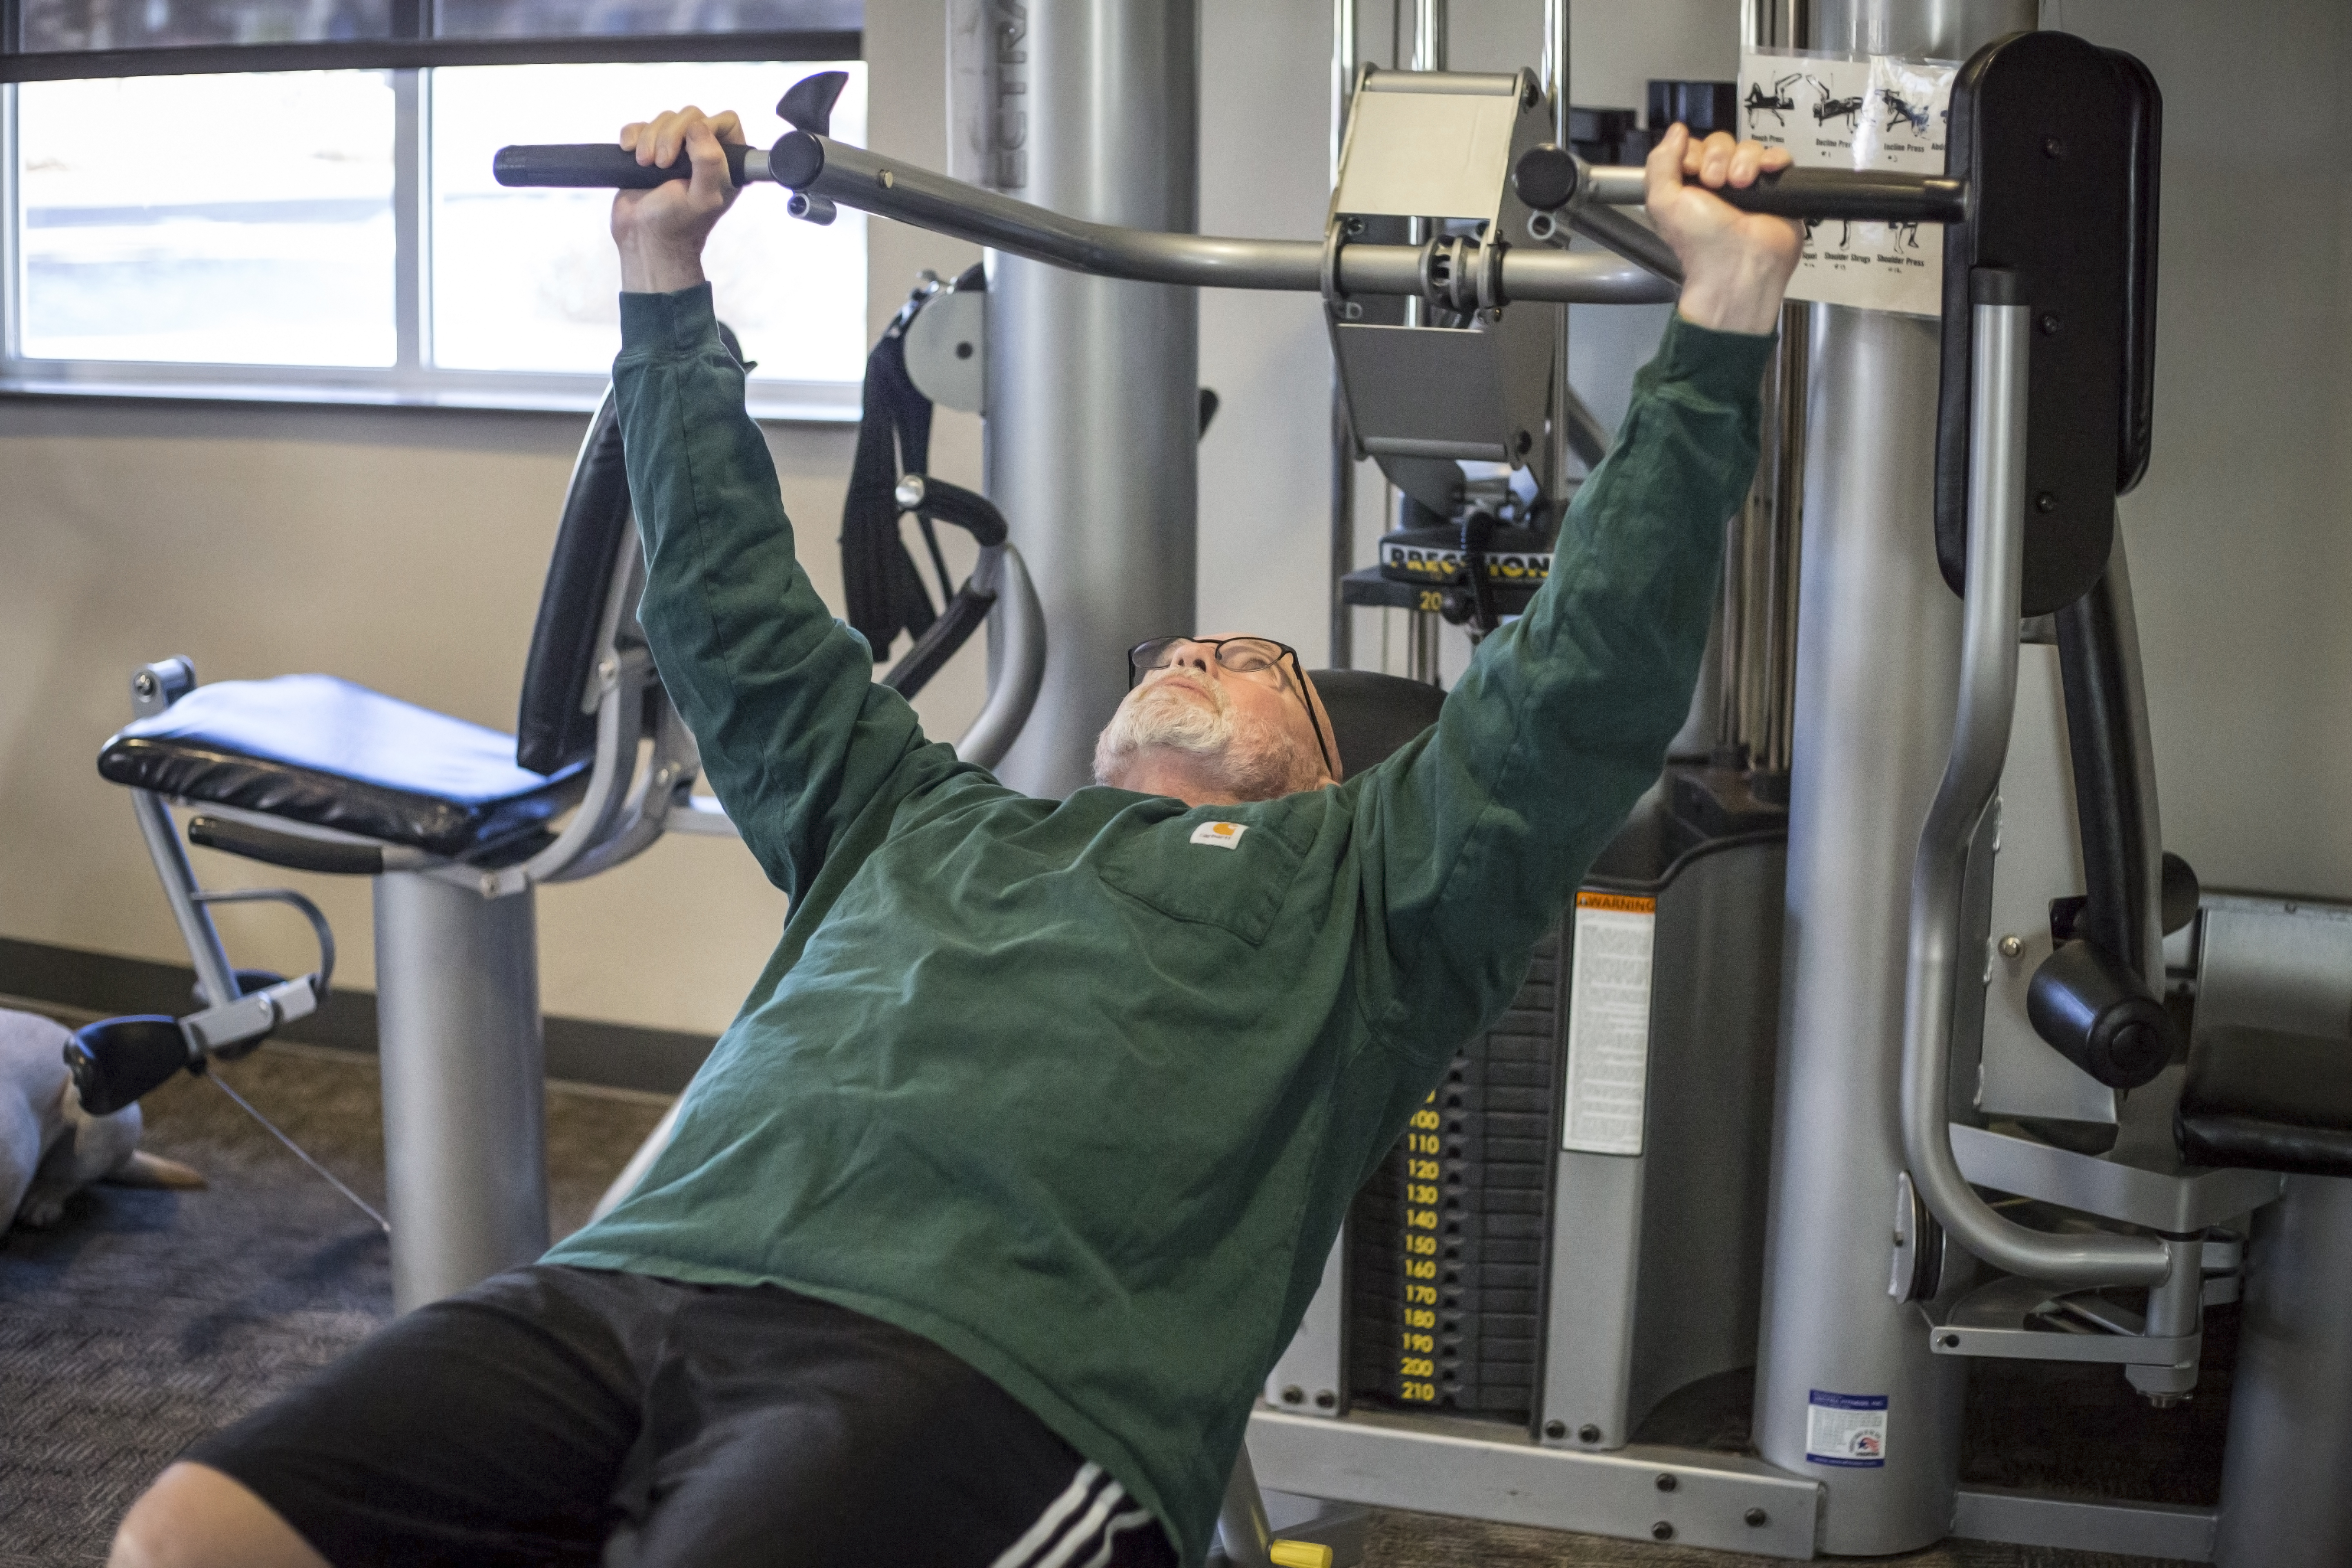 Older man operates a weight machine at the Social activity at Bend Senior Center.